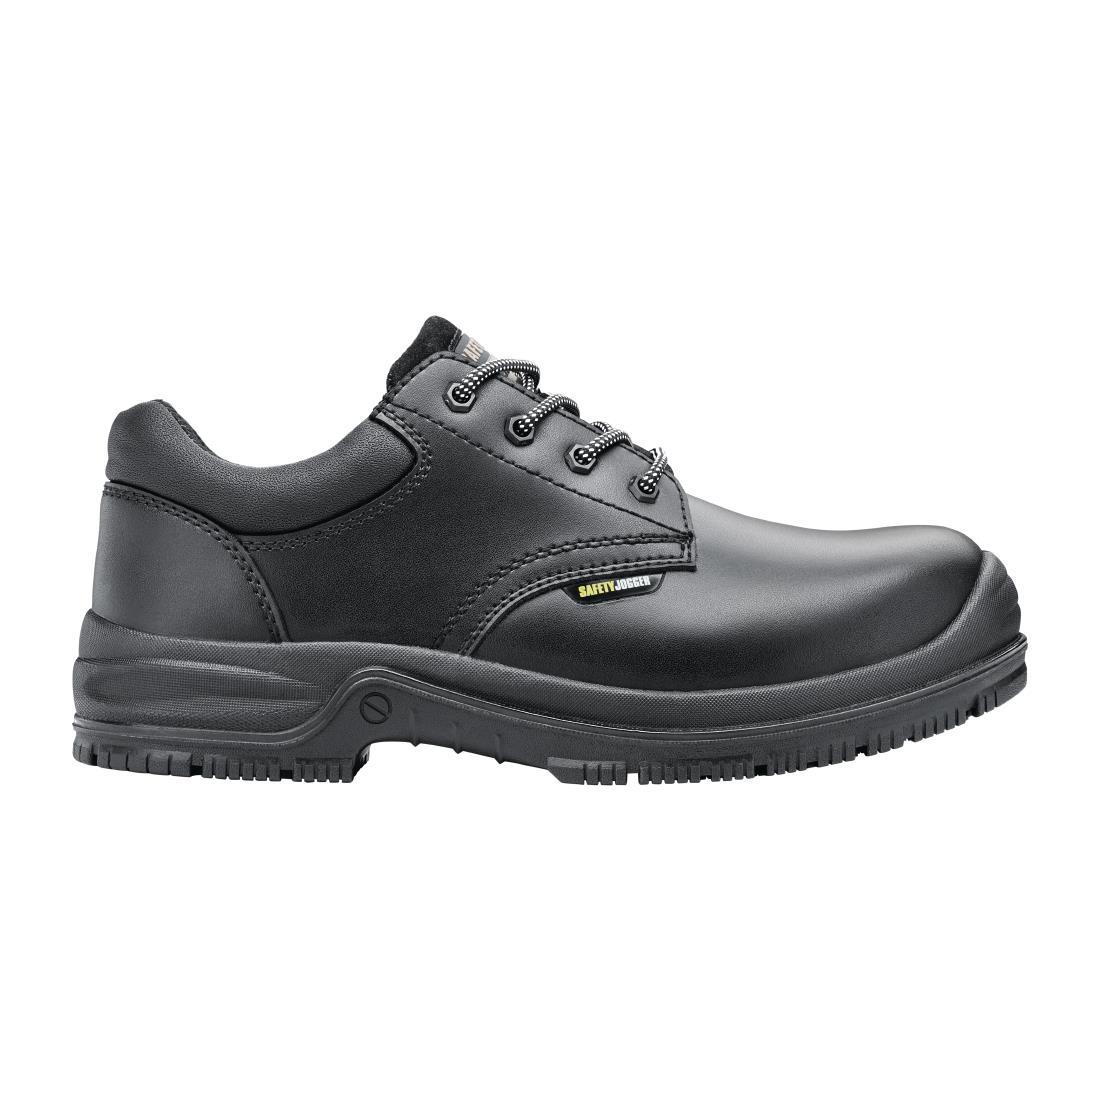 Shoes for Crews X111081 Safety Shoe Black Size 40 - BB596-40  - 1